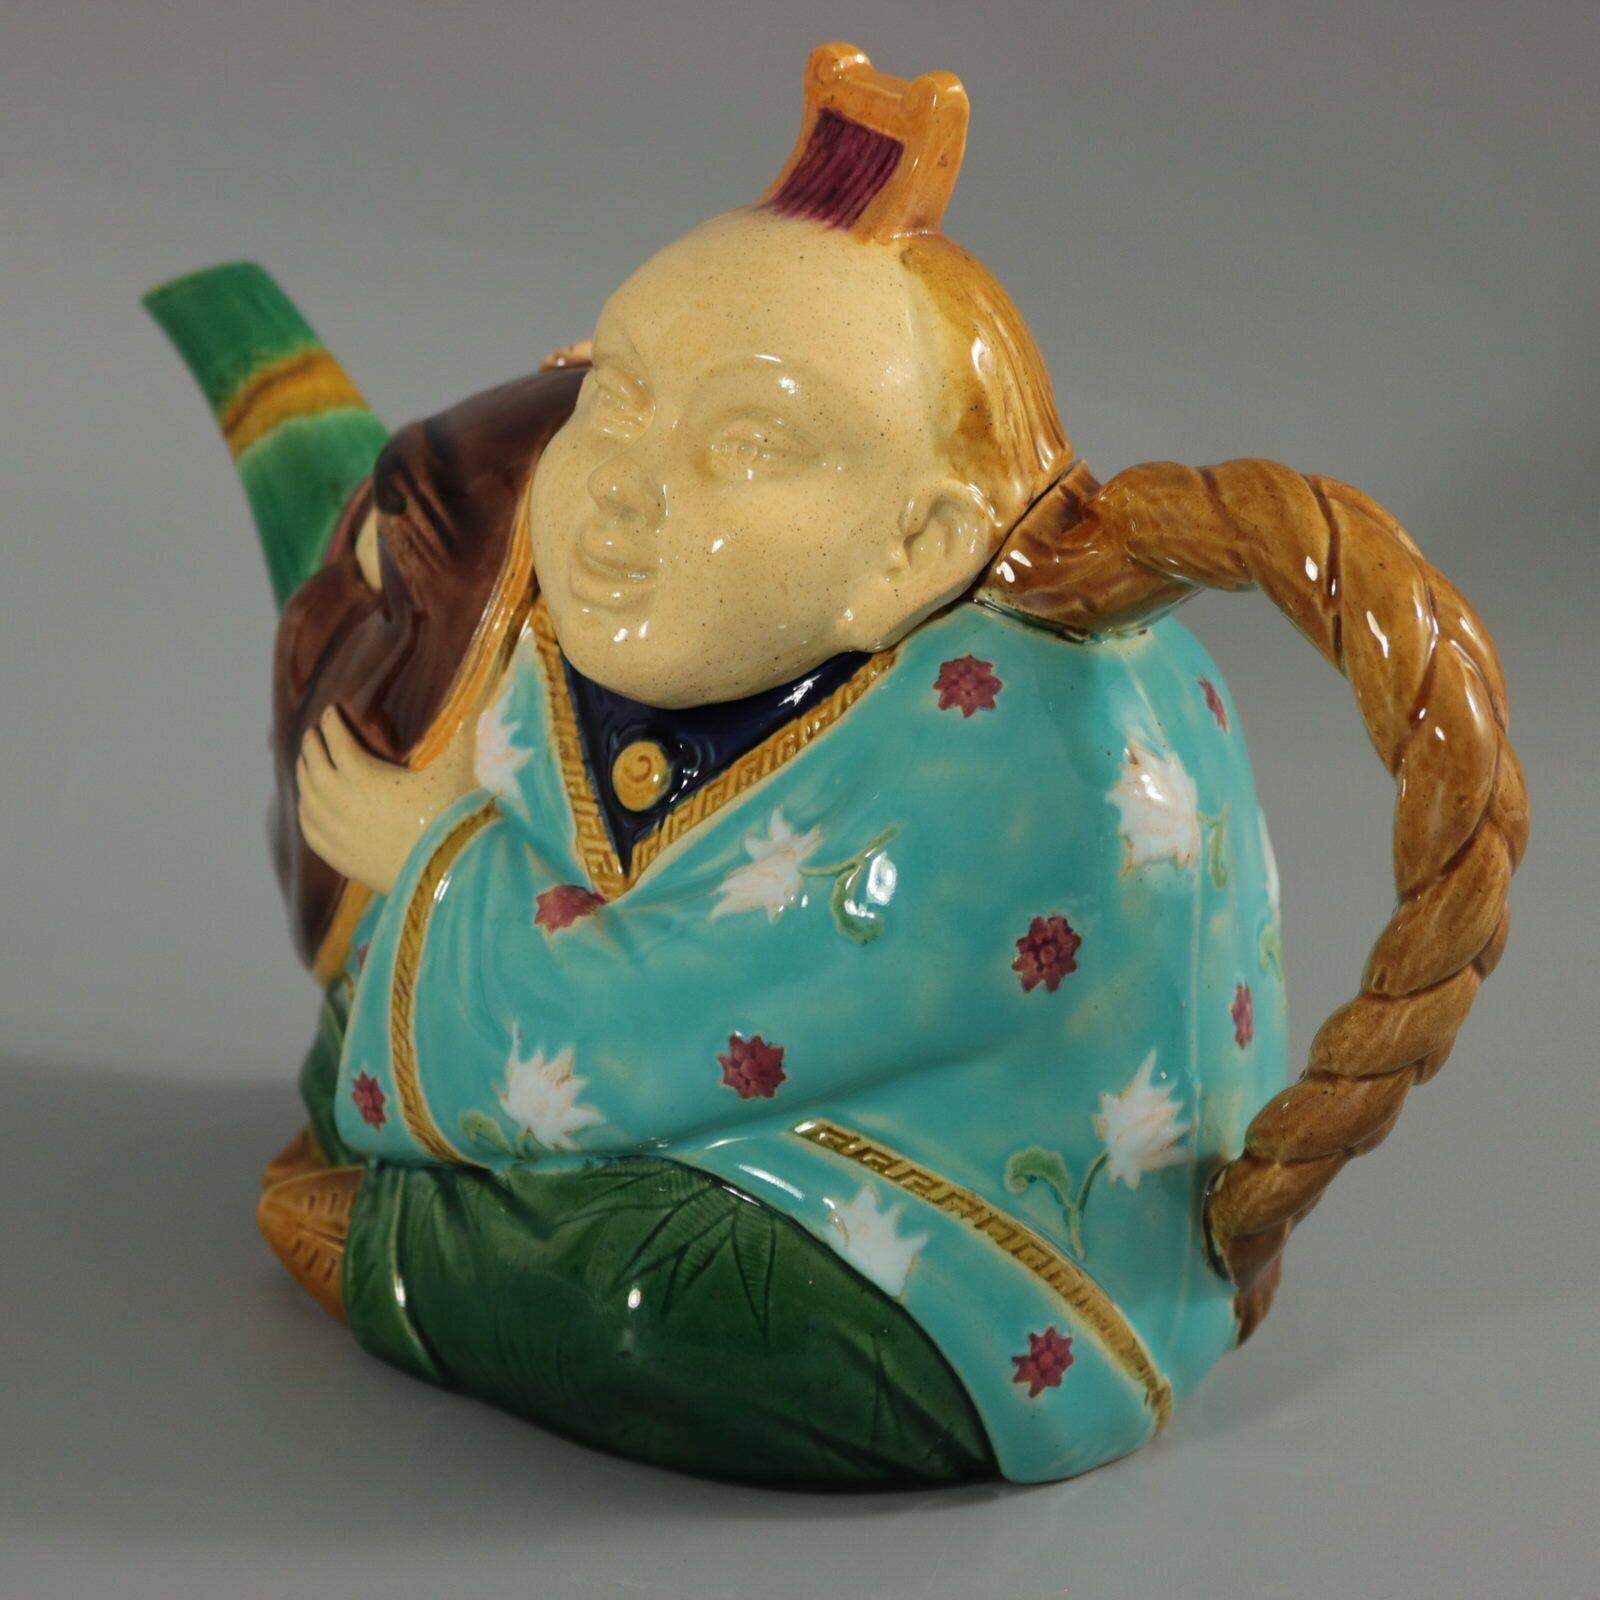 Minton Majolica teapot which features an oriental man, dressed in a floral robe, holding a Noh mask. His hair forms the handle. Colouration: turquoise, brown, green, are predominant. The piece bears maker's marks for the Minton pottery. Bears a